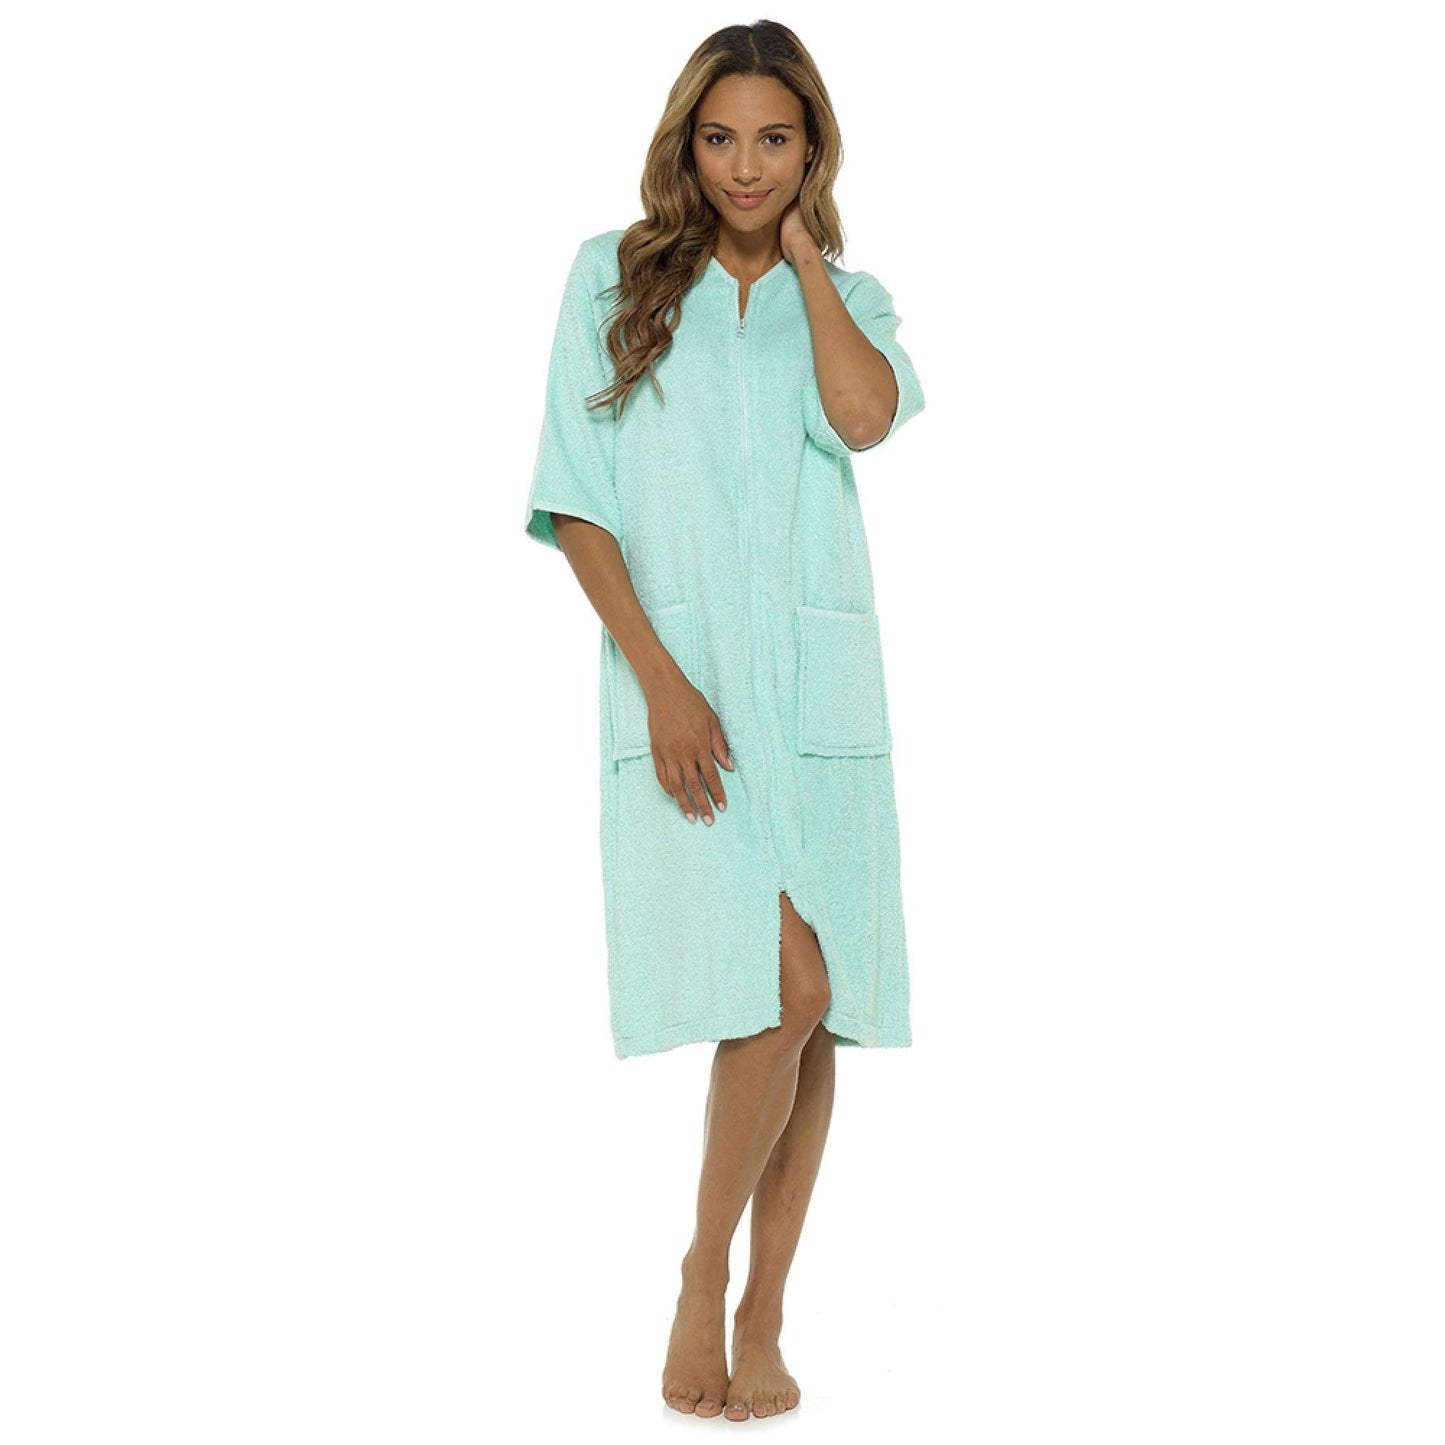 Ladies 100% Cotton Terry Towelling Zip Up Bath Robe Dressing Gown House Coat